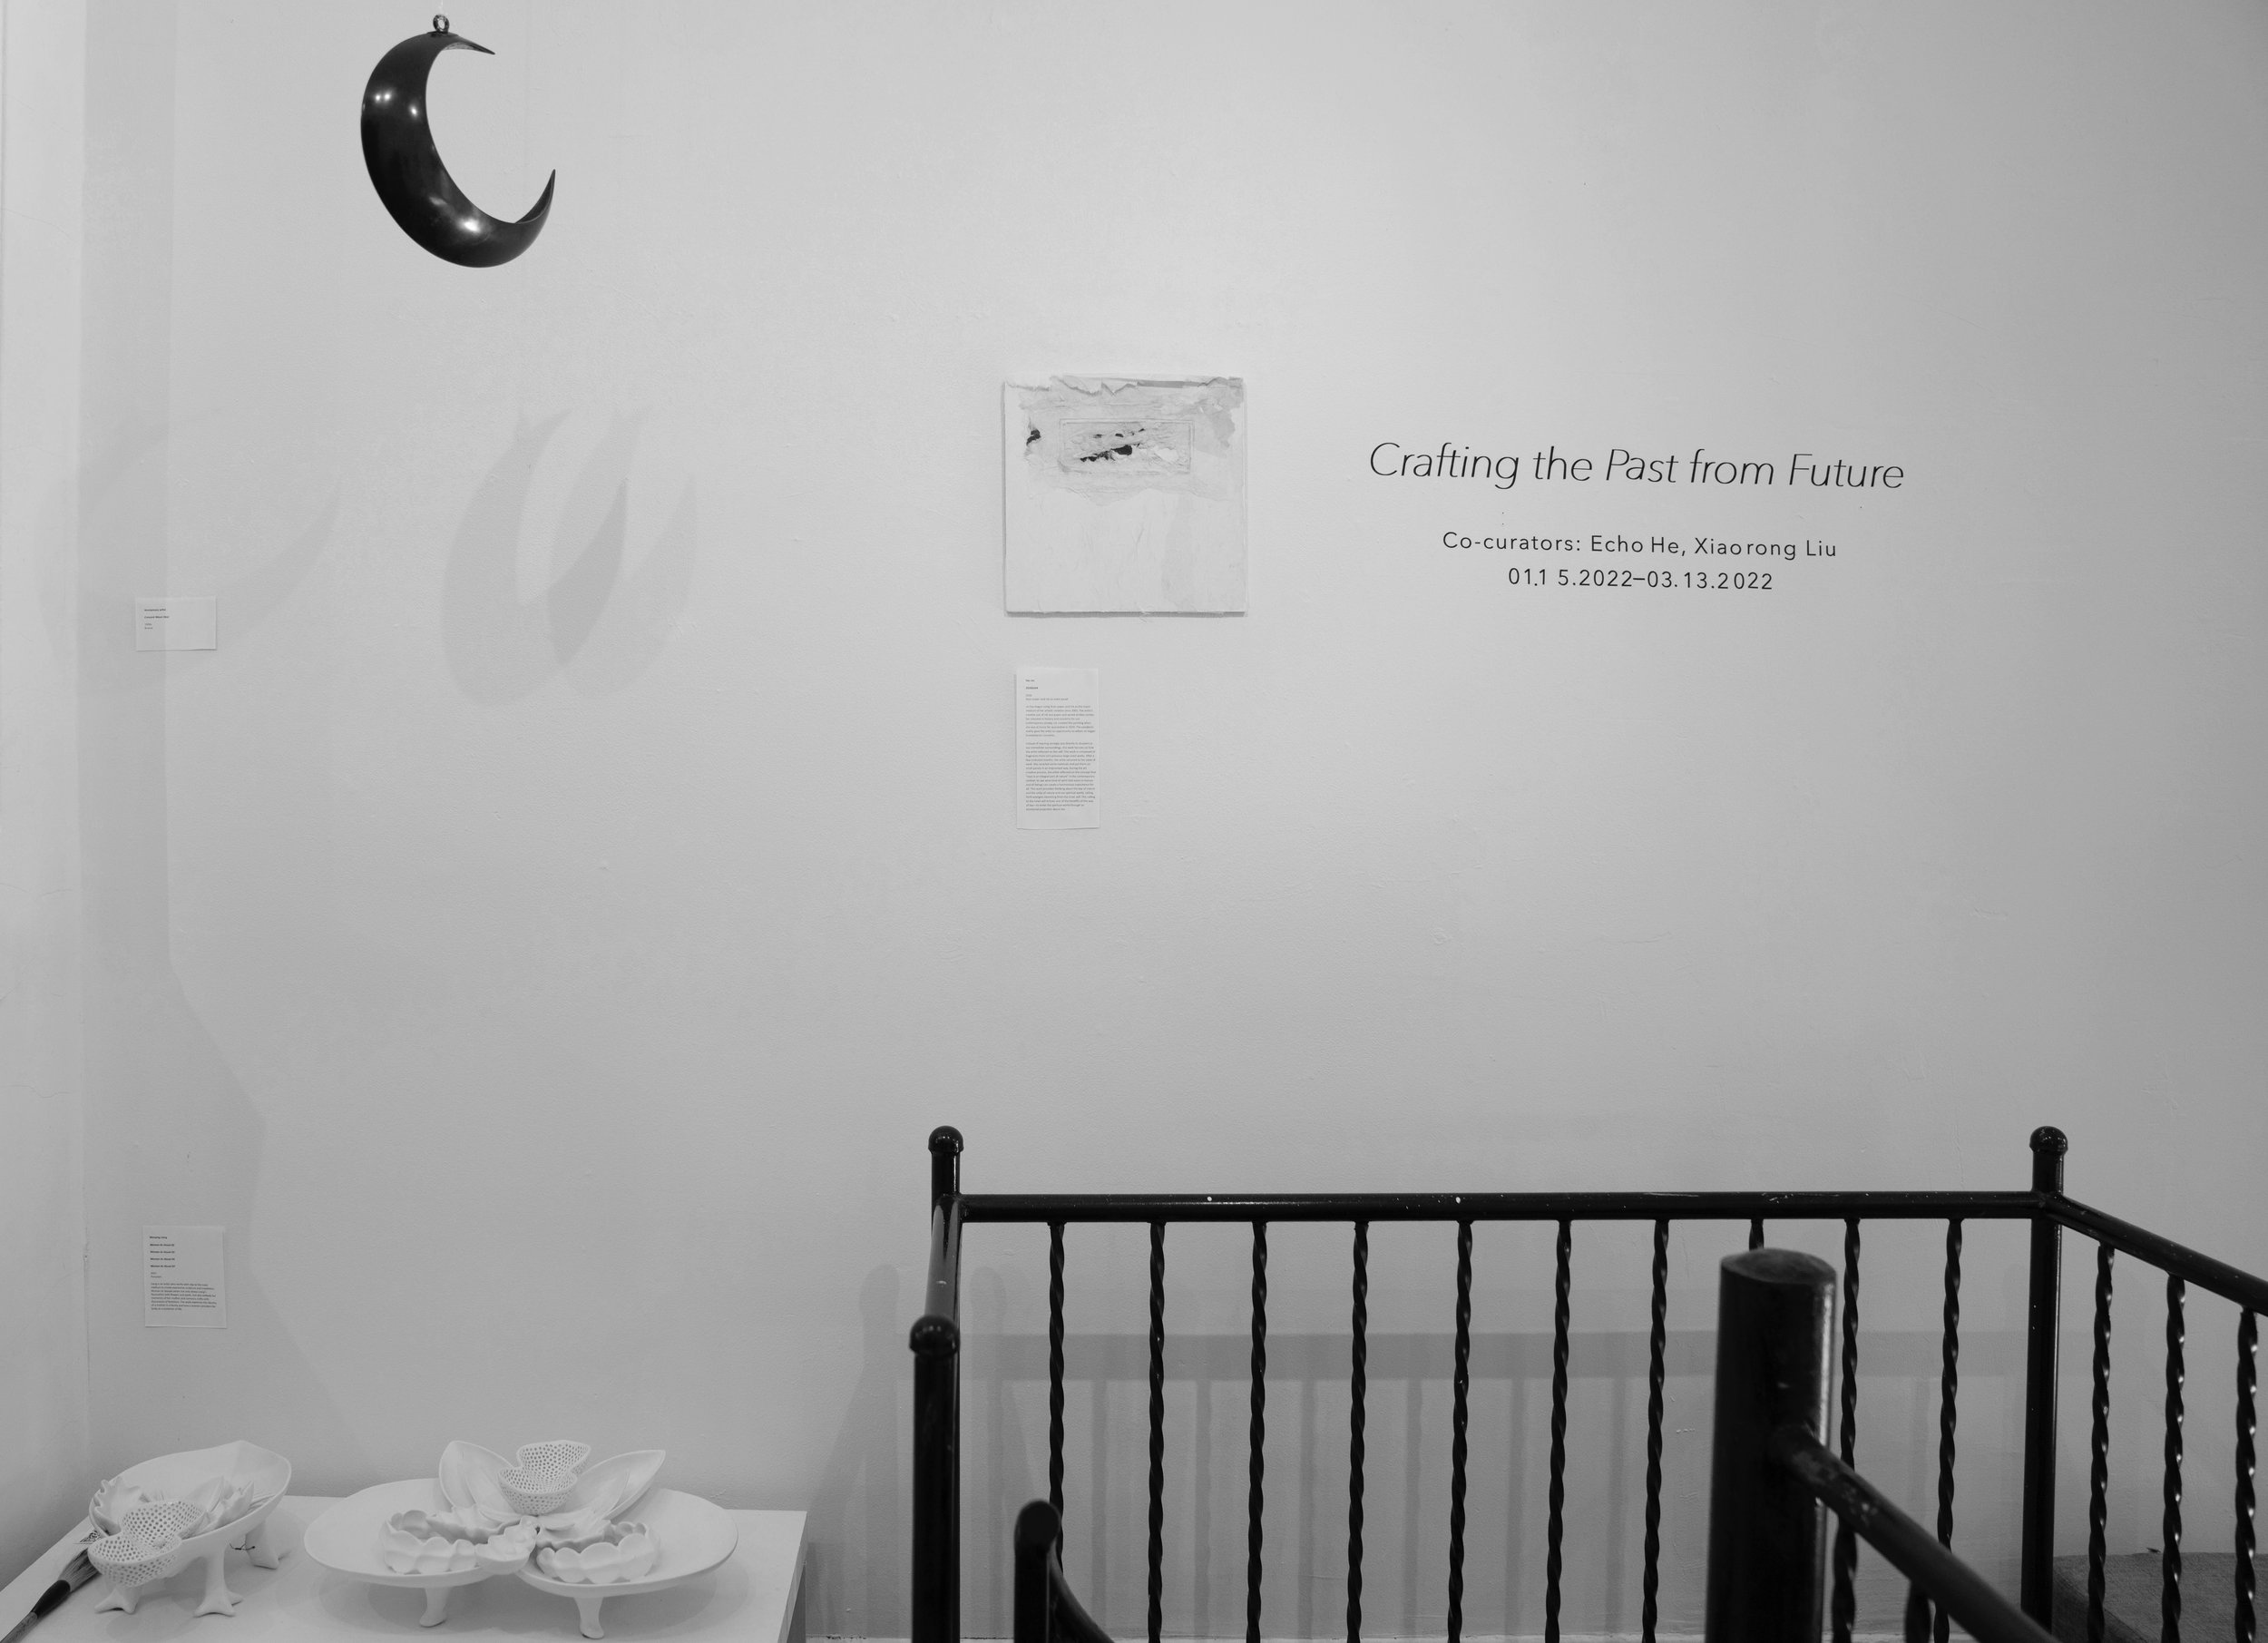  Installation View of Crafting the Past from the Future. Photo by Joey ZhaoyinWang and Lynn Hai, courtesy of Fou Gallery 